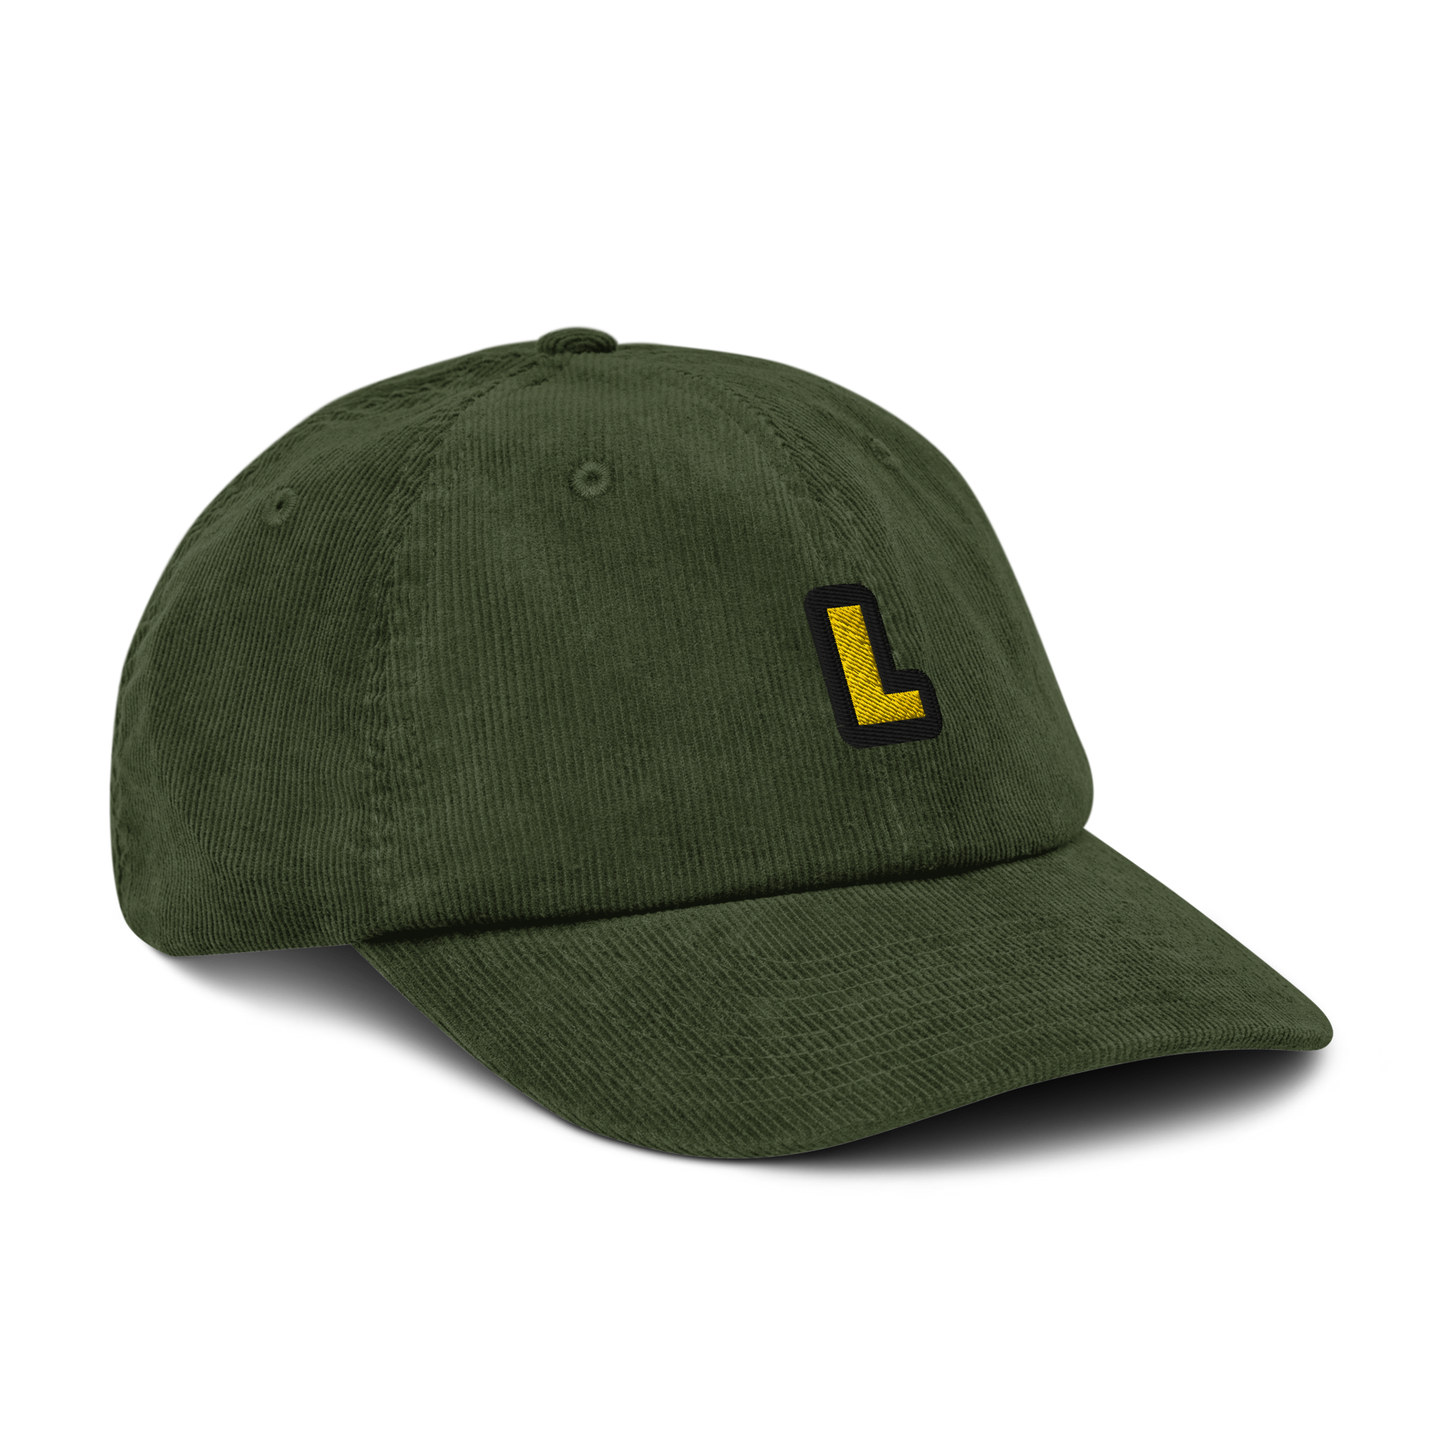 L - The letter collection - Corduroy hat